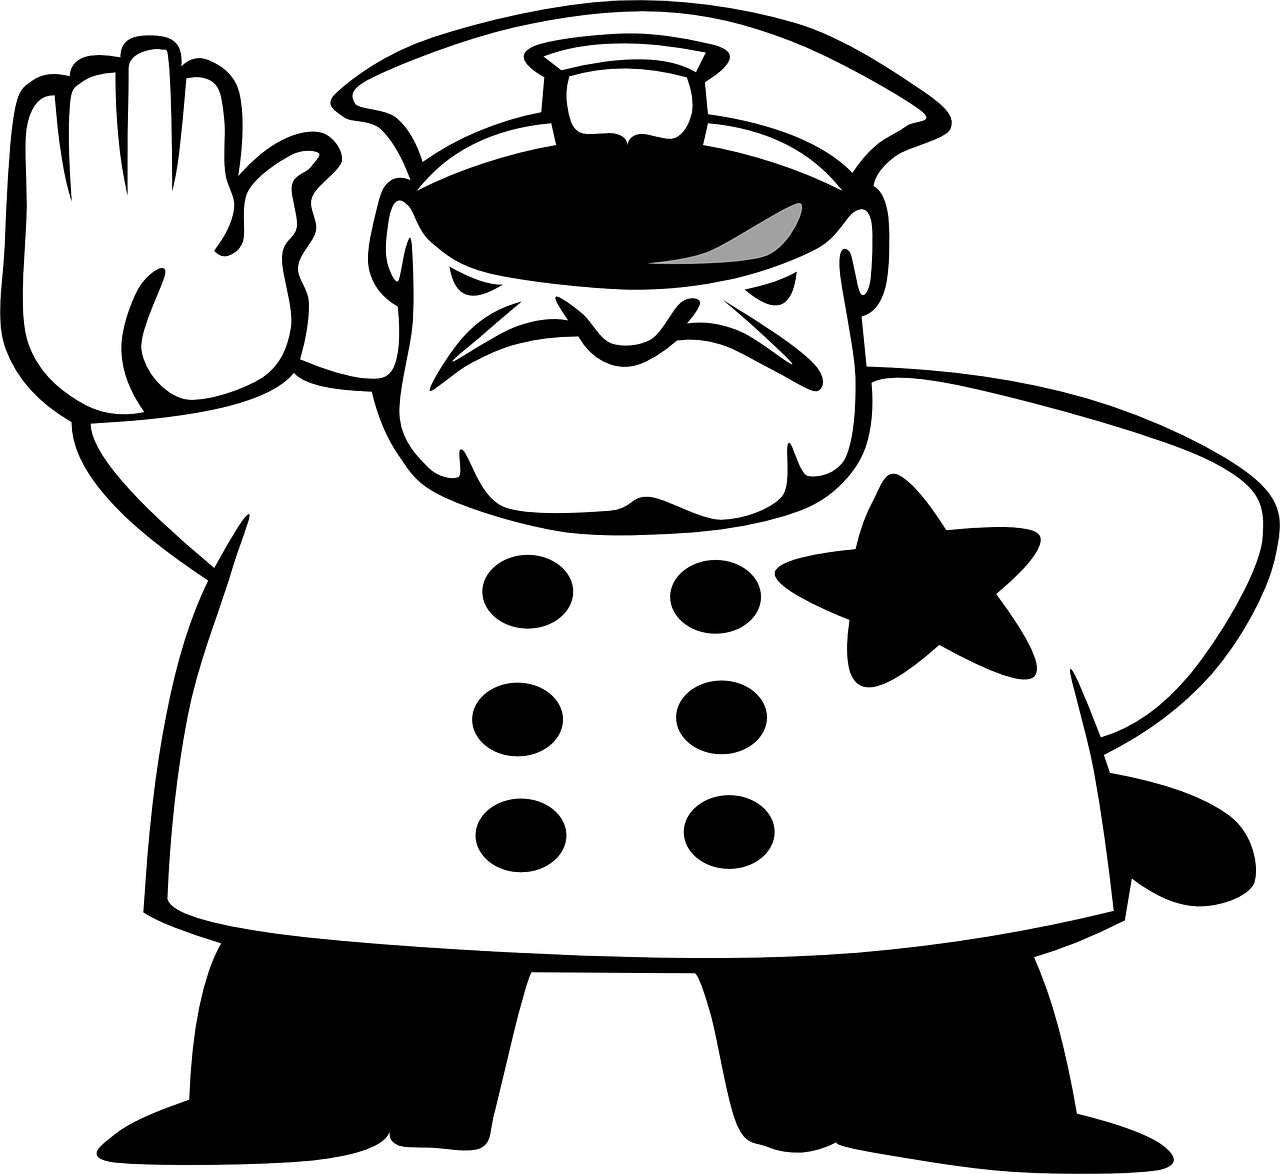 Disease clipart black and white. Police hat drawing at